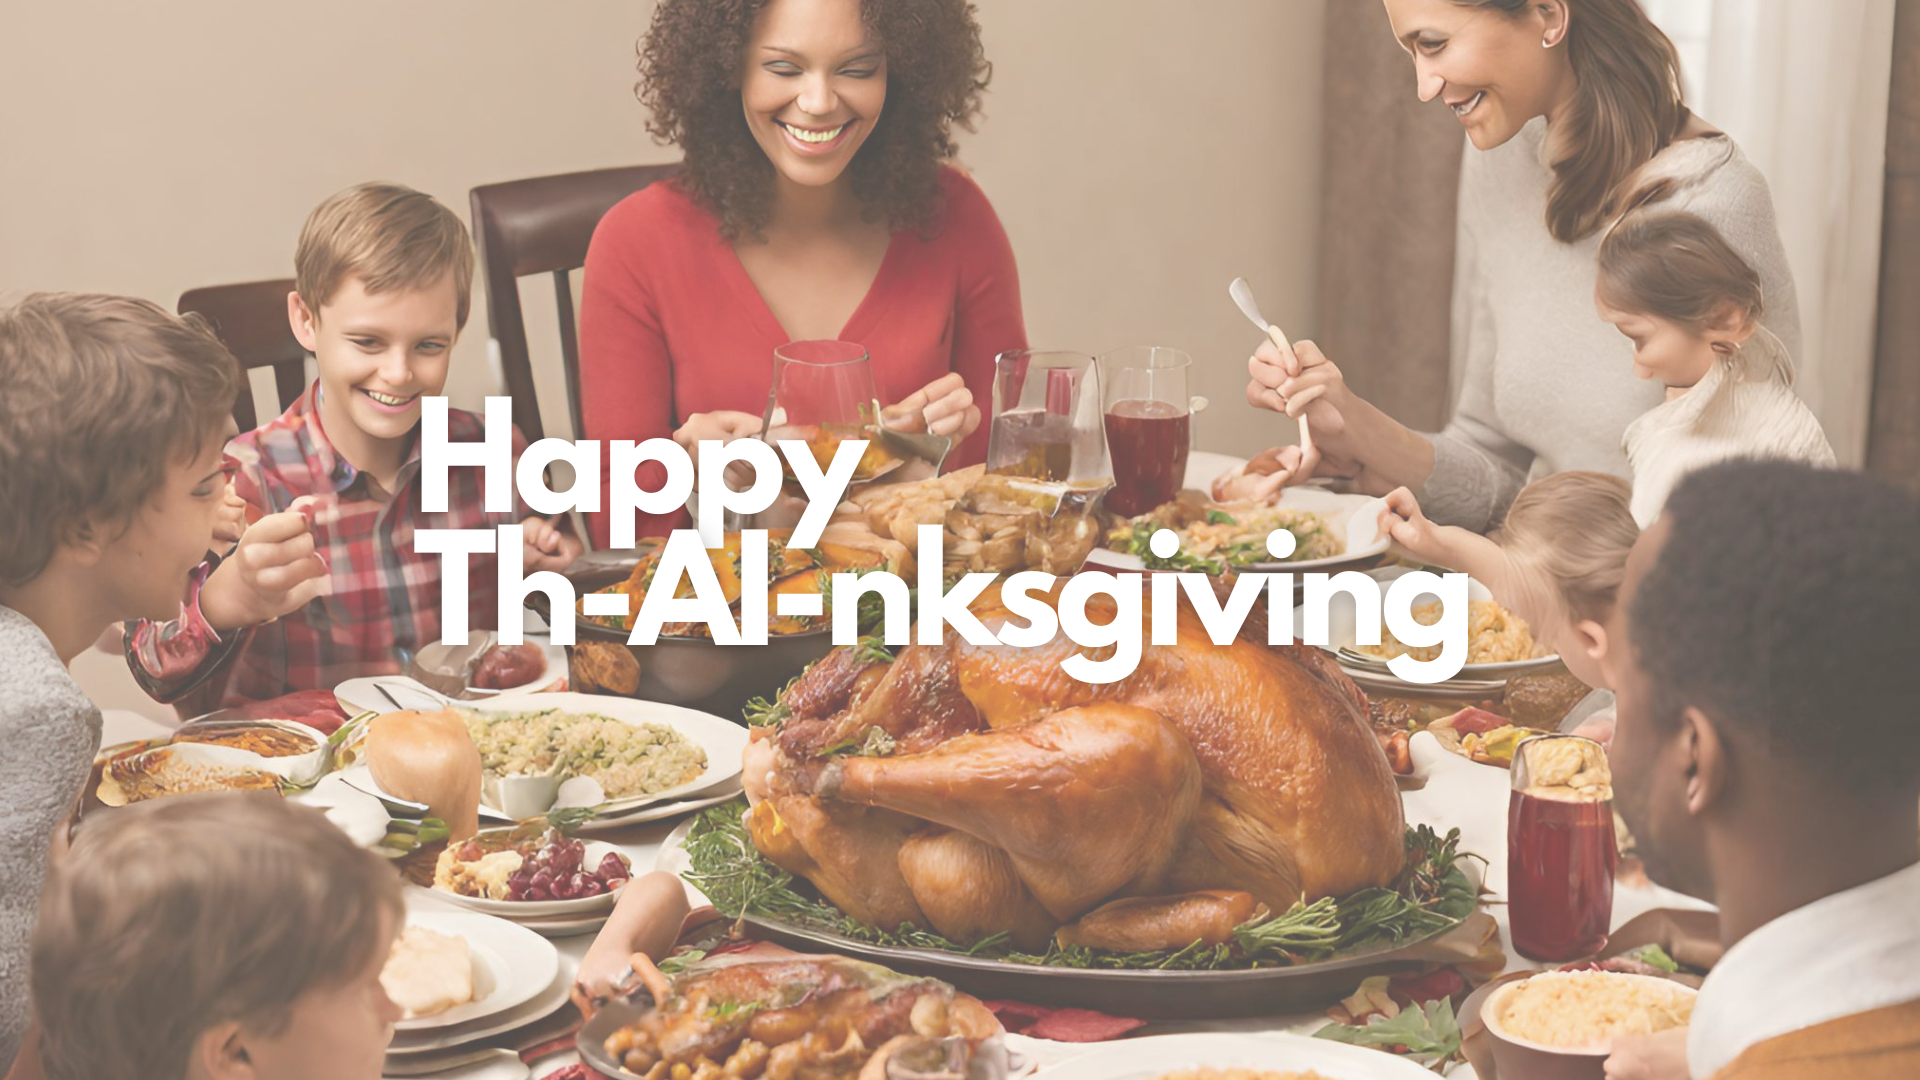 You are currently viewing Happy Th-AI-nksgiving!